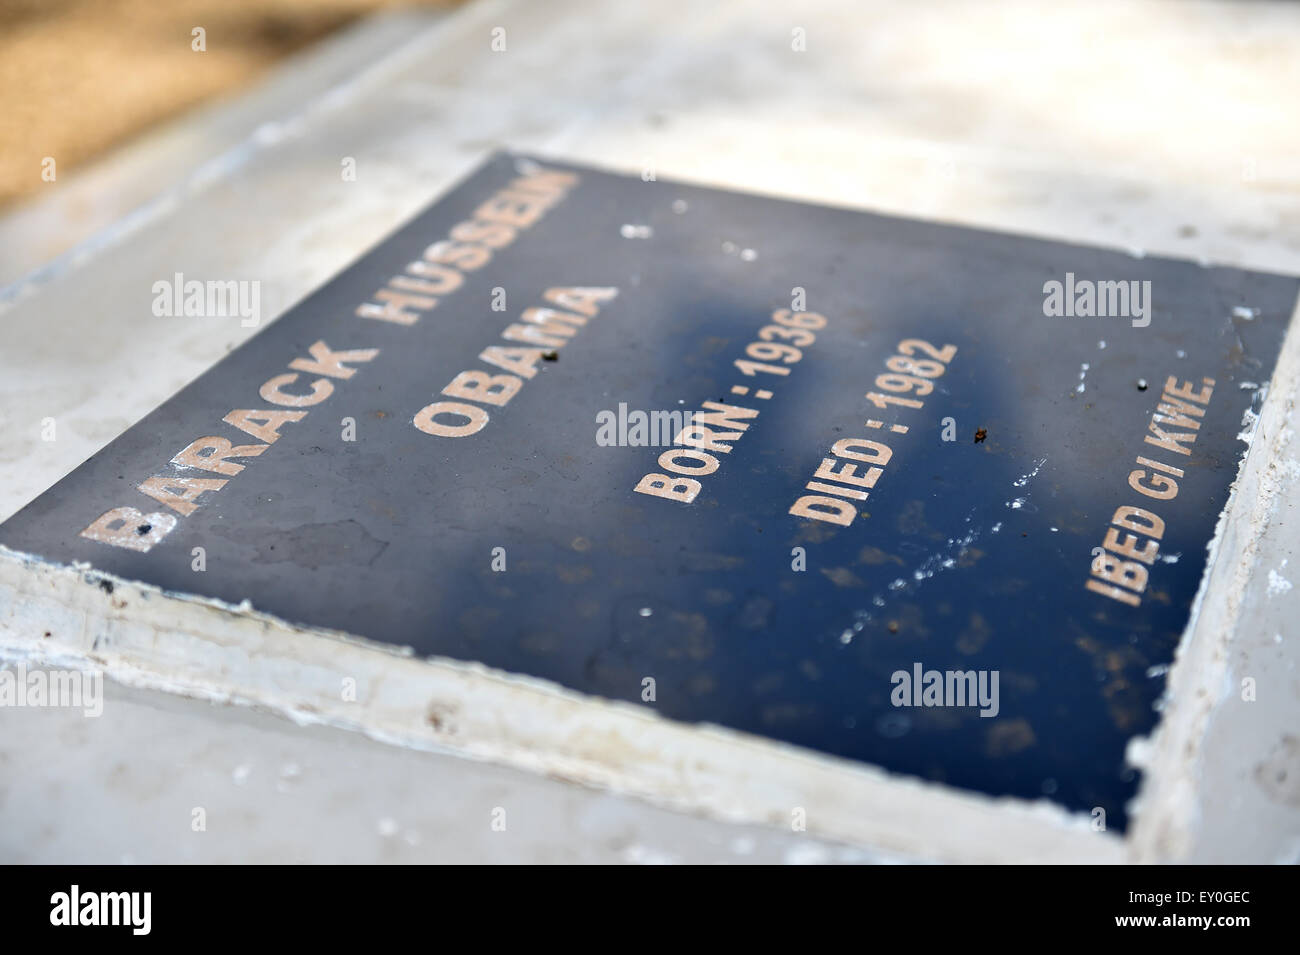 (150719) -- KOGELO, July 19, 2015(Xinhua) -- The grave plaque of Barack Hussein Obama, father of U.S. President Barack Obama, is seen at Kogelo Village in Siaya, Kenya, June 29, 2015. Barack Obama has made several trips in the village before, where his father was born and buried. (Xinhua/Sun Ruibo) Stock Photo